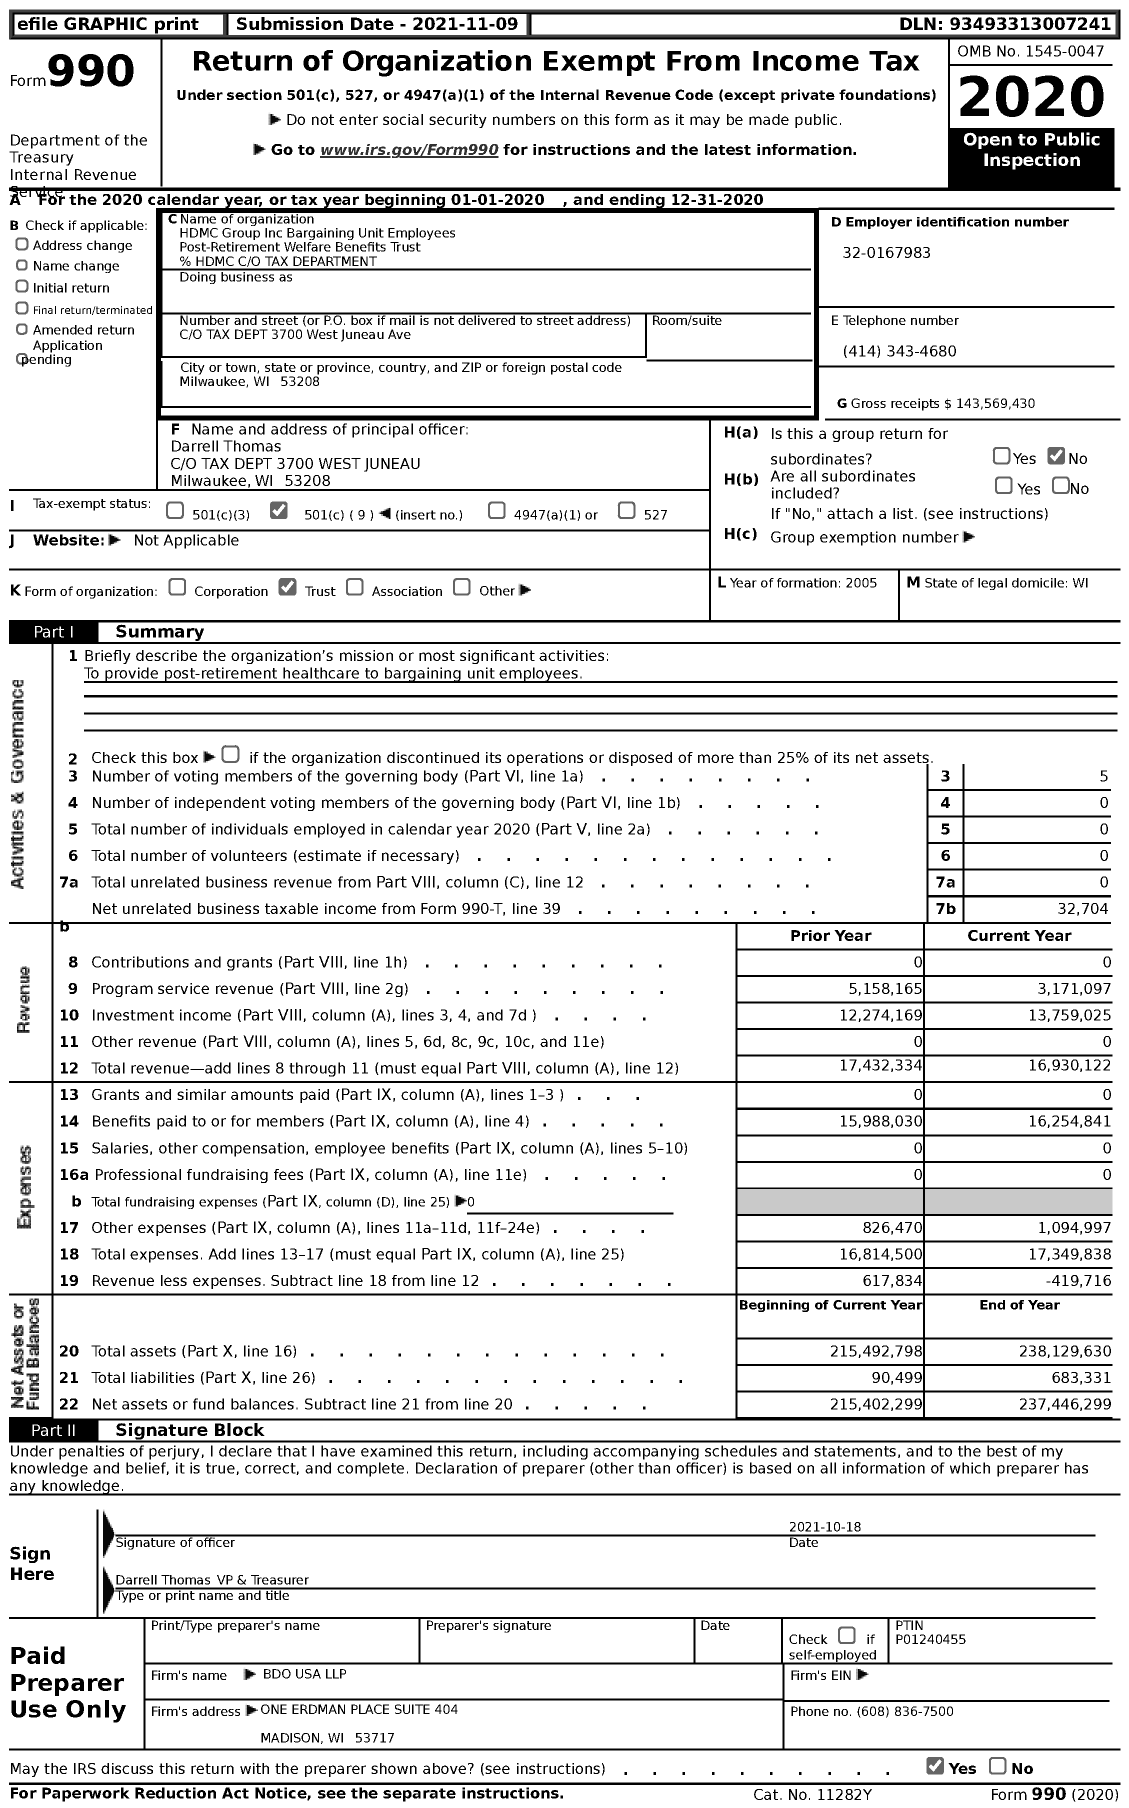 Image of first page of 2020 Form 990 for HDMC Group Inc Bargaining Unit Employees Post-Retirement Welfare Benefits Trust